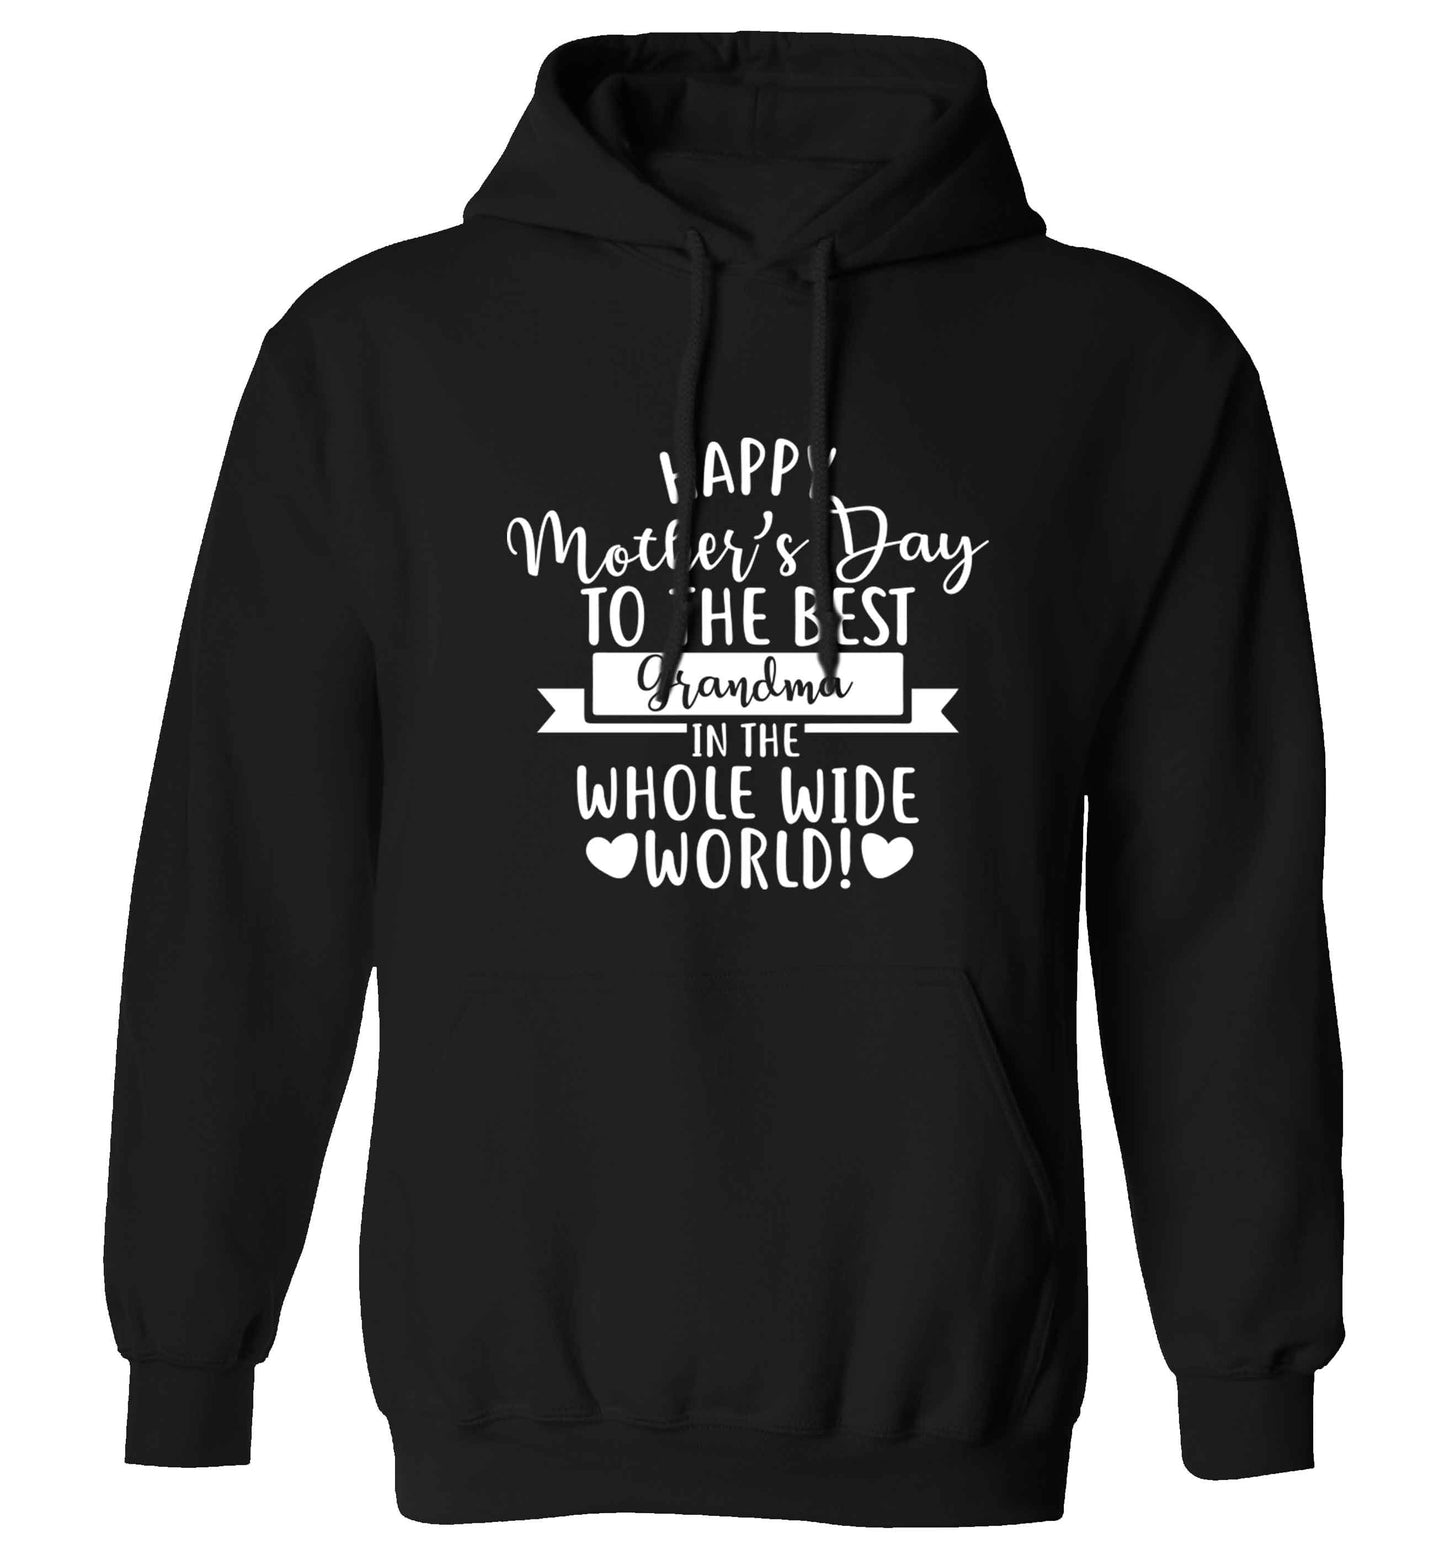 Happy mother's day to the best grandma in the world adults unisex black hoodie 2XL